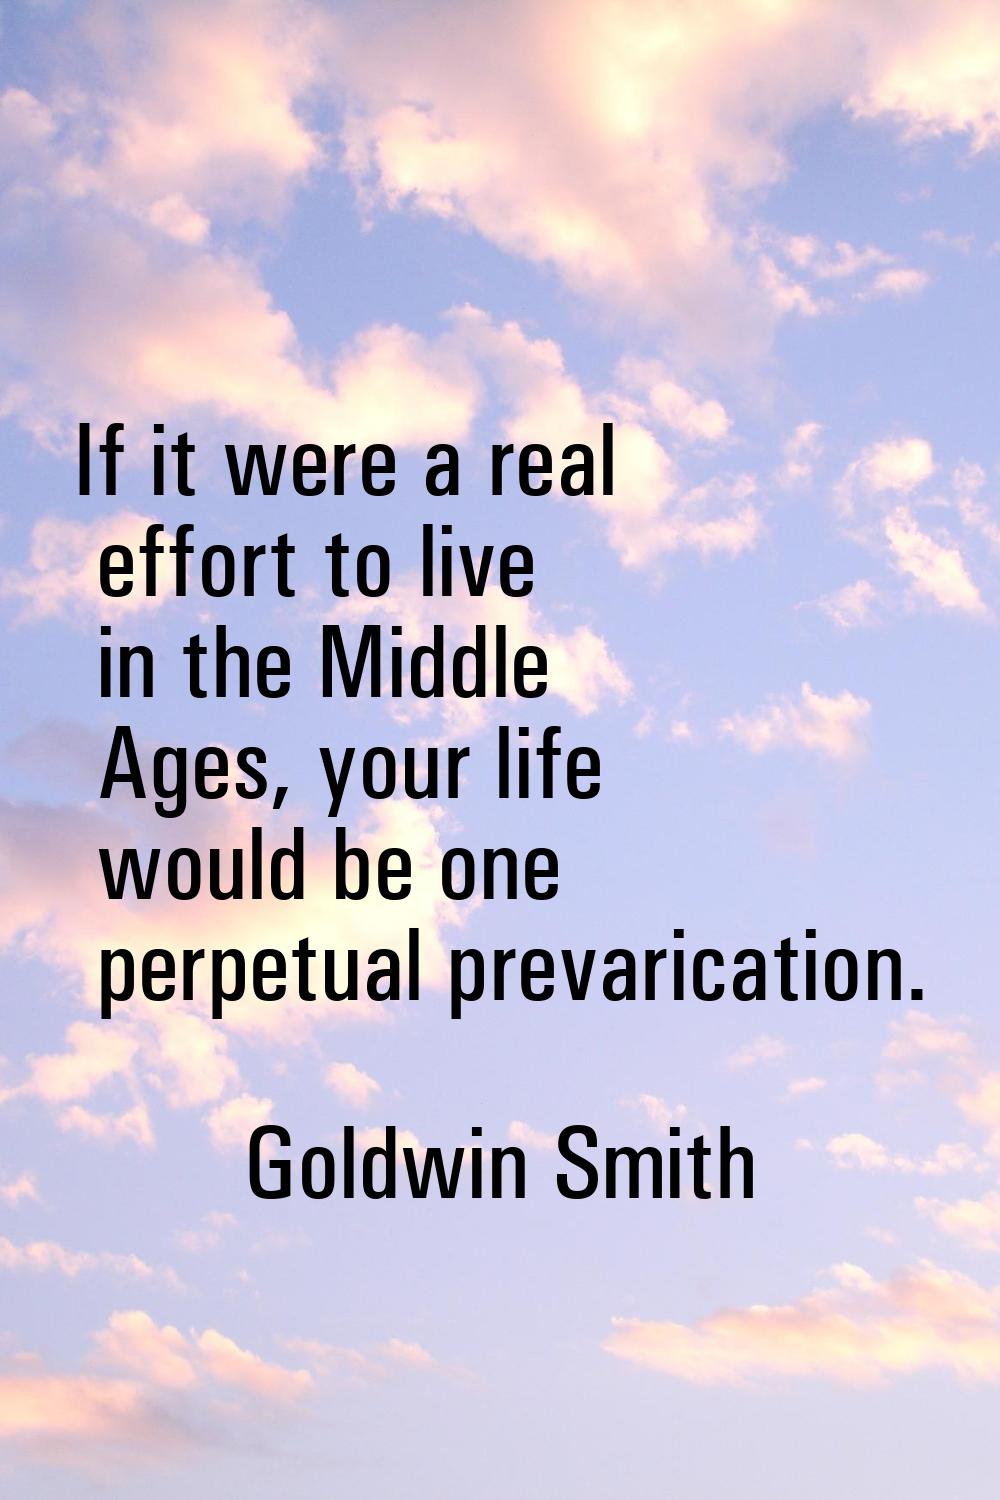 If it were a real effort to live in the Middle Ages, your life would be one perpetual prevarication